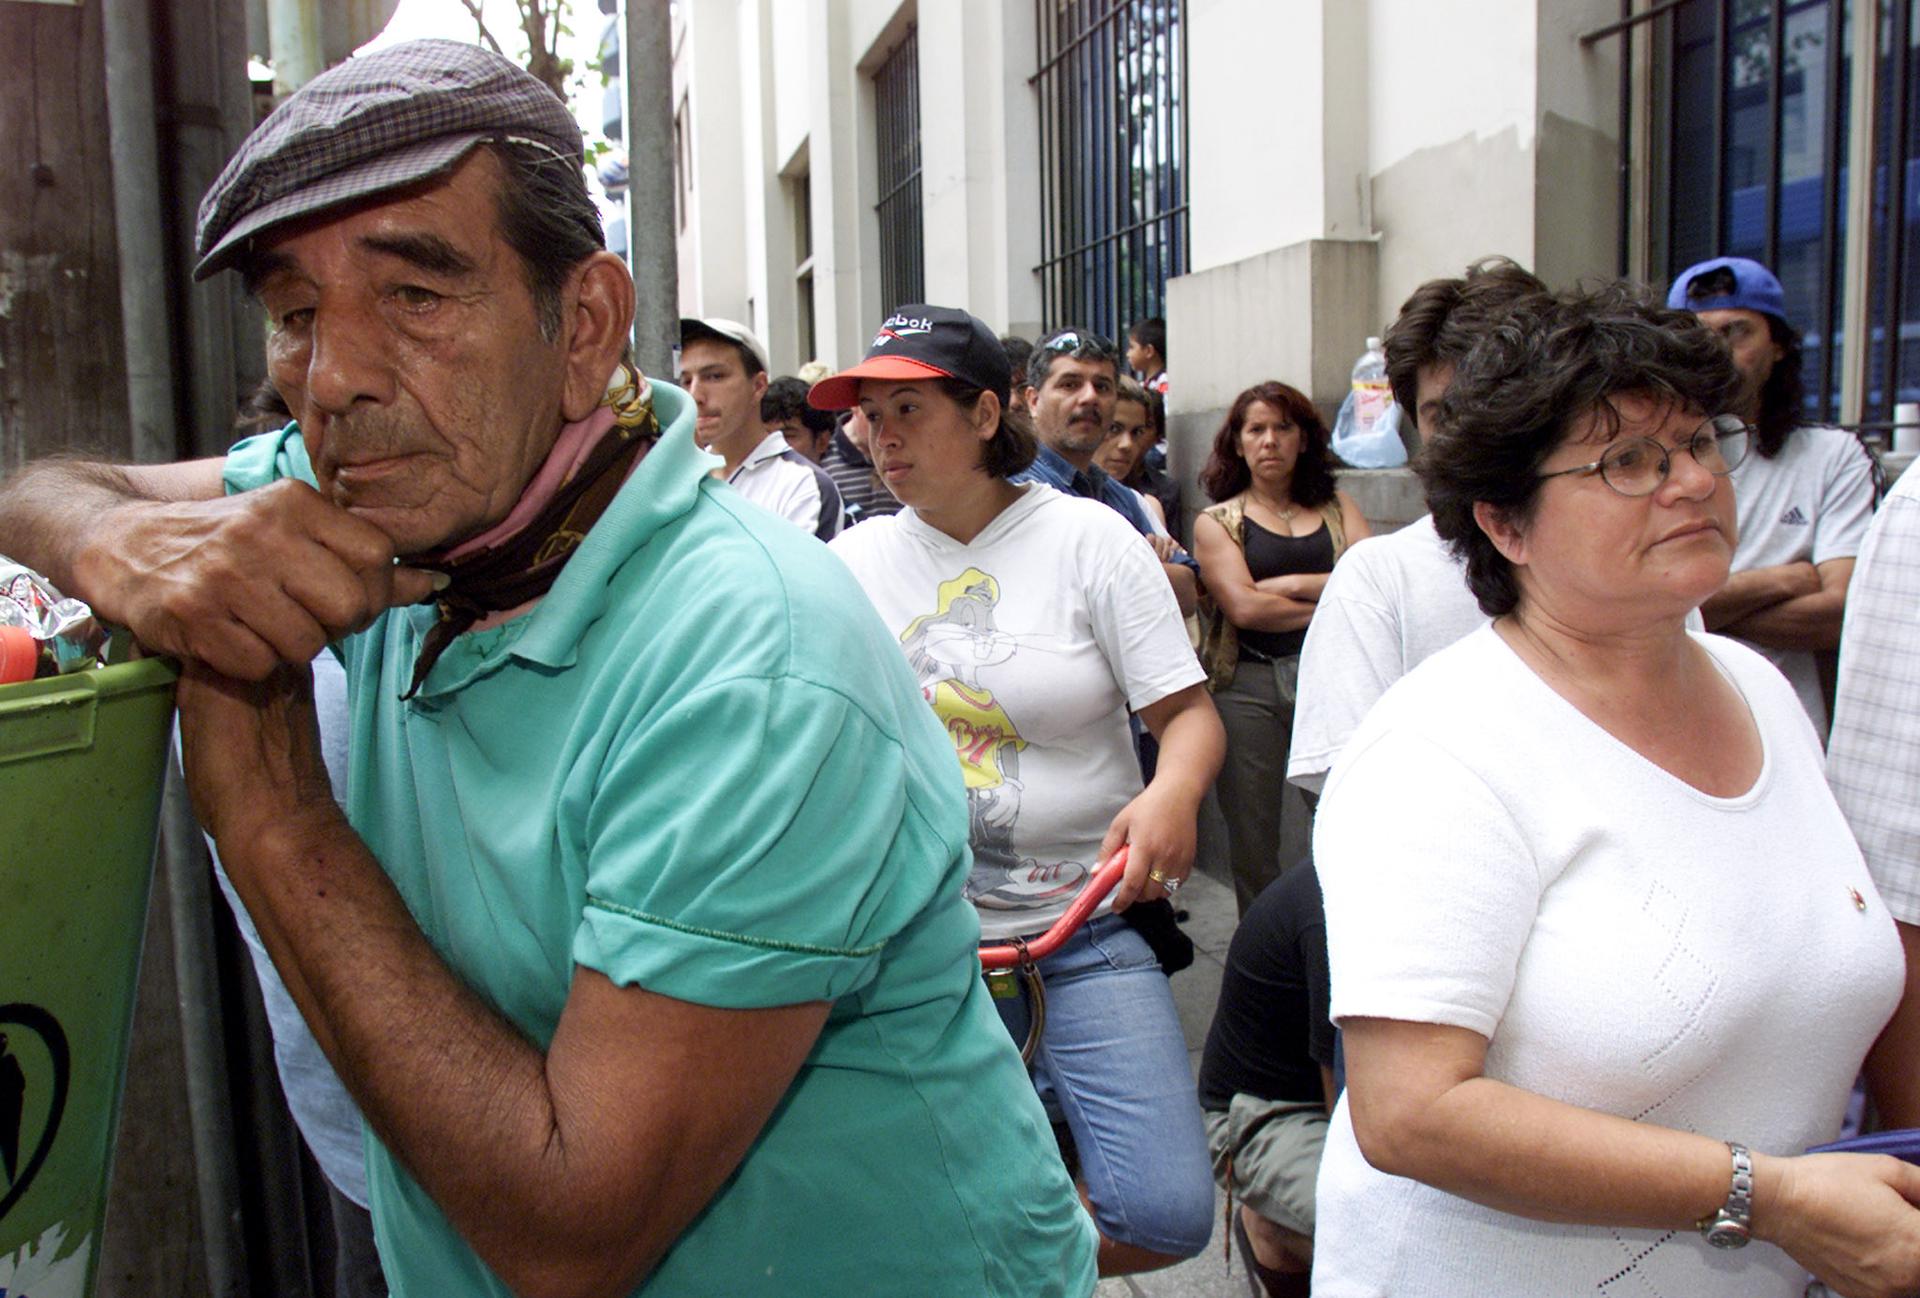 Unemployed Argentines and workers line up outside the Banco de la Nacion in Buenos Aires trying to collect their money, December 21, 2001. Argentina would default on its sovereign debt days later. 